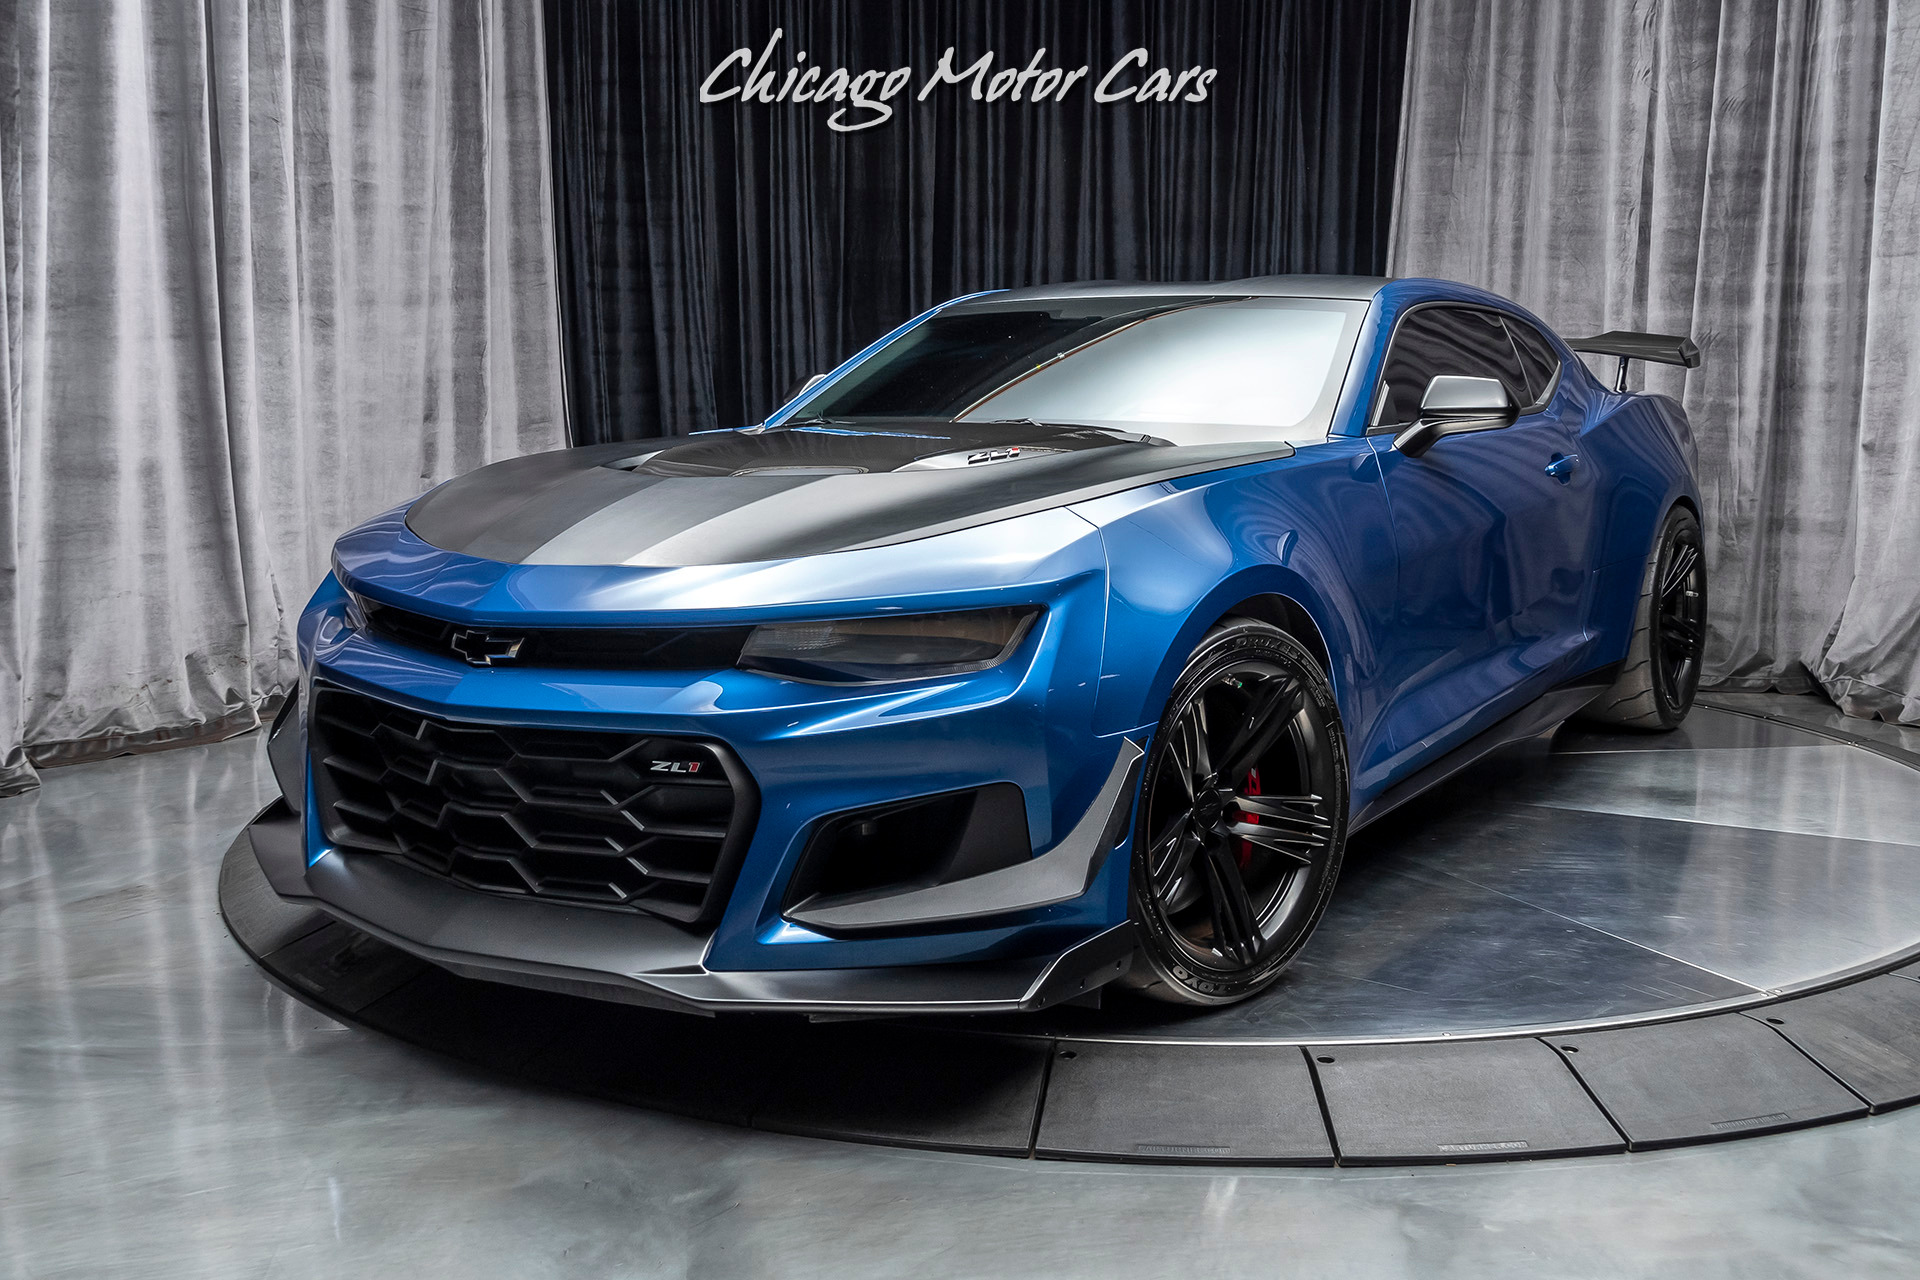 Used 2018 Chevrolet Camaro Zl1 1Le Coupe Msrp $74K+ Extreme Track Pack!  Carbon Fiber! 6-Speed! For Sale (Special Pricing) | Chicago Motor Cars  Stock #17198